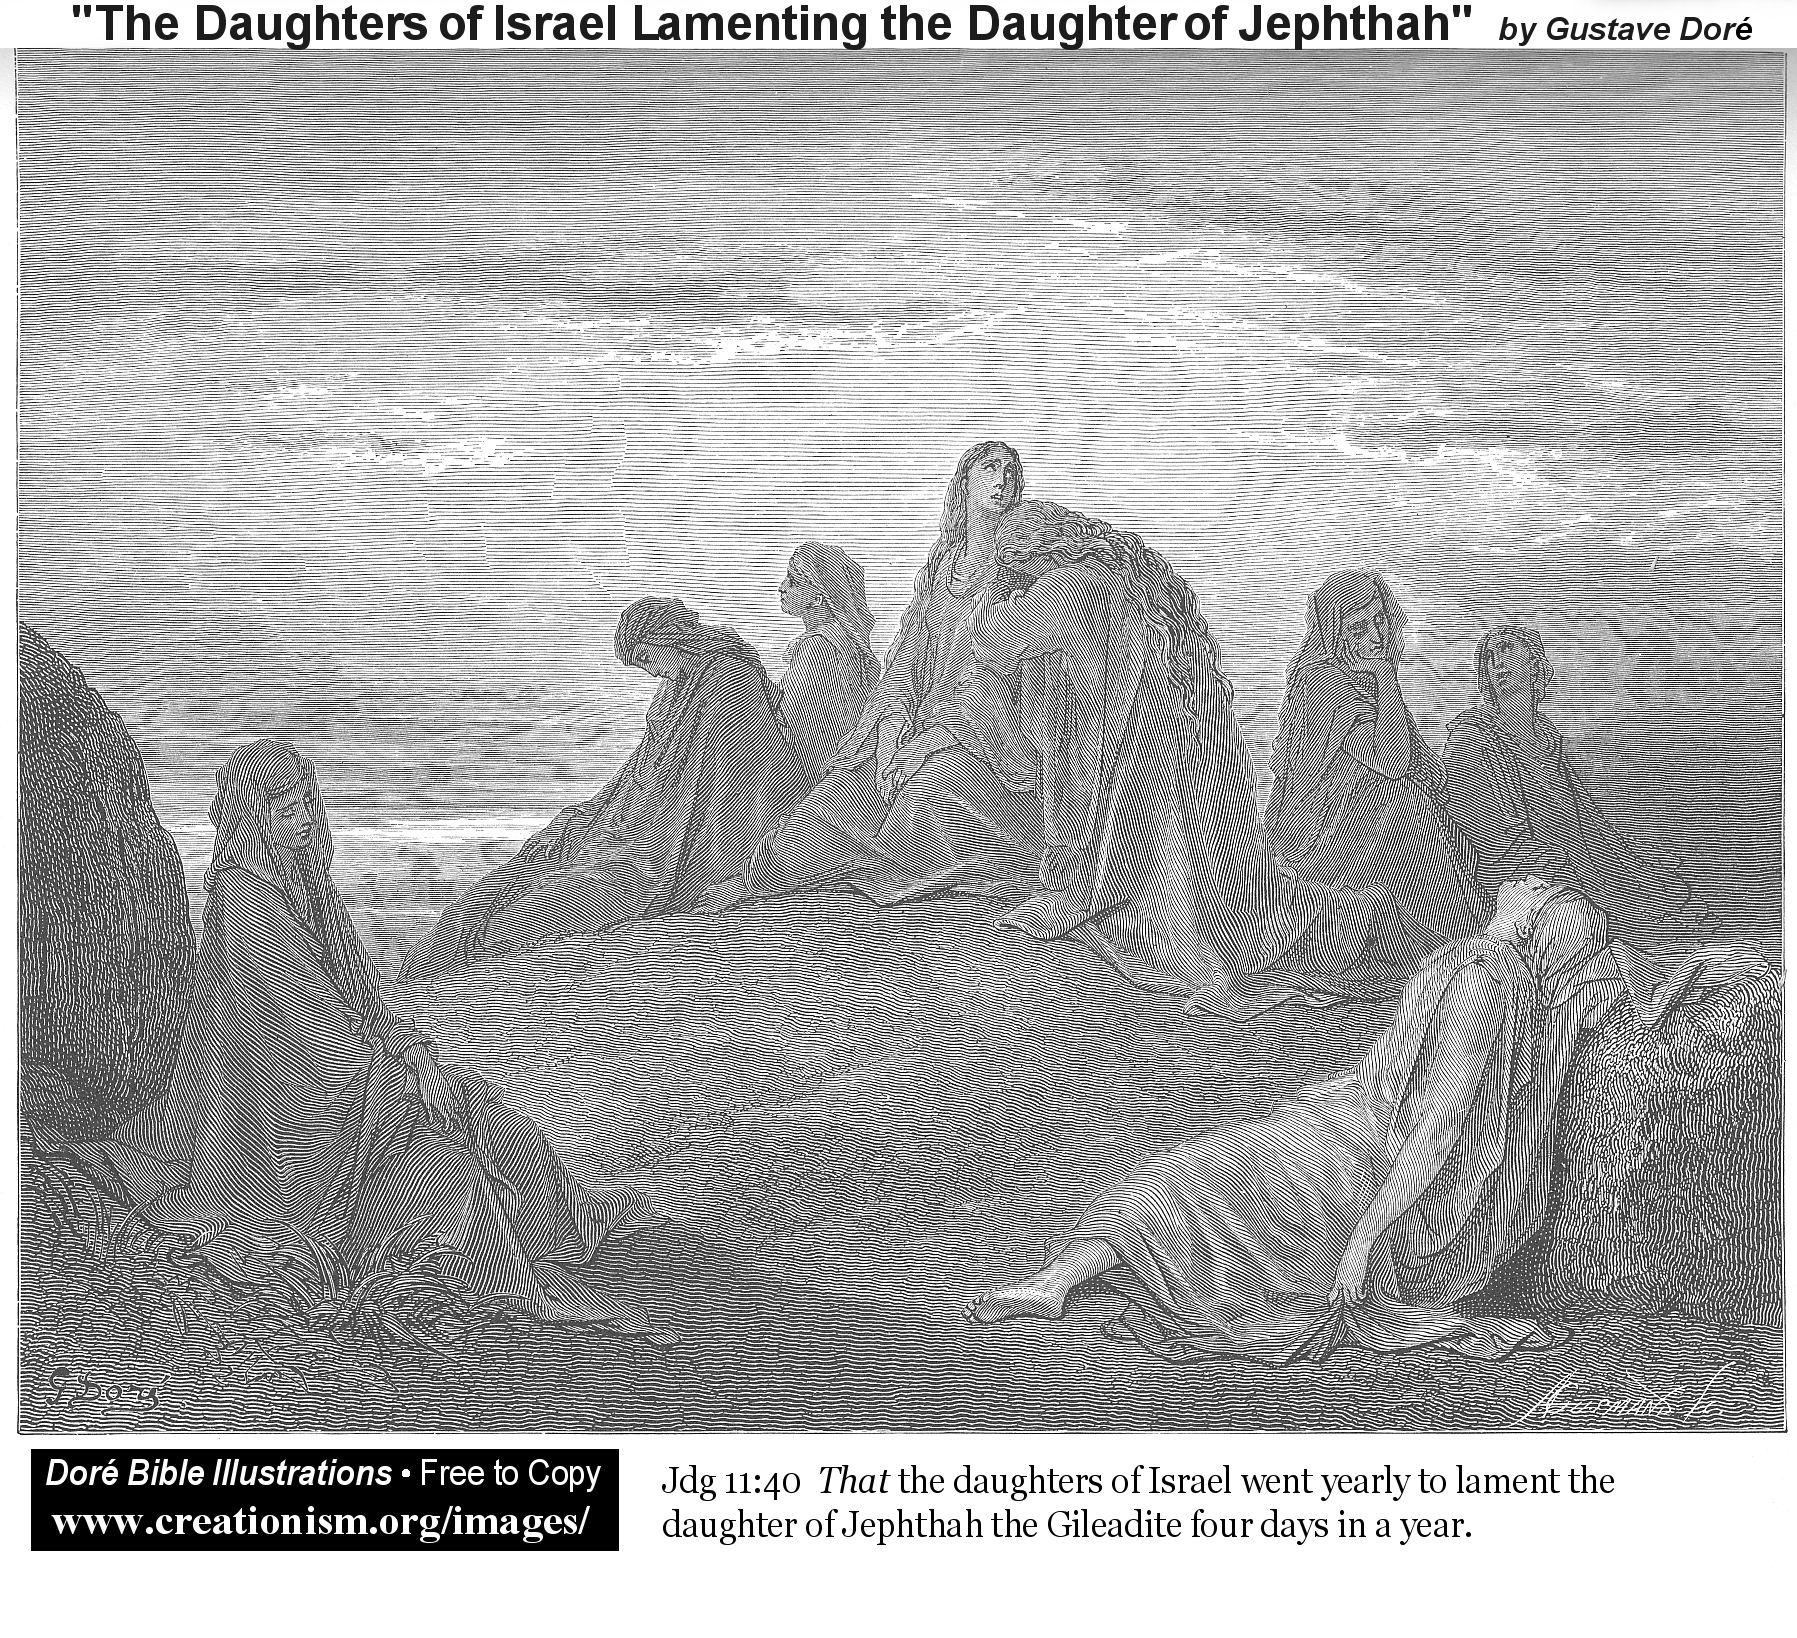 Bible Illustrations, by G. Dore - Main Page